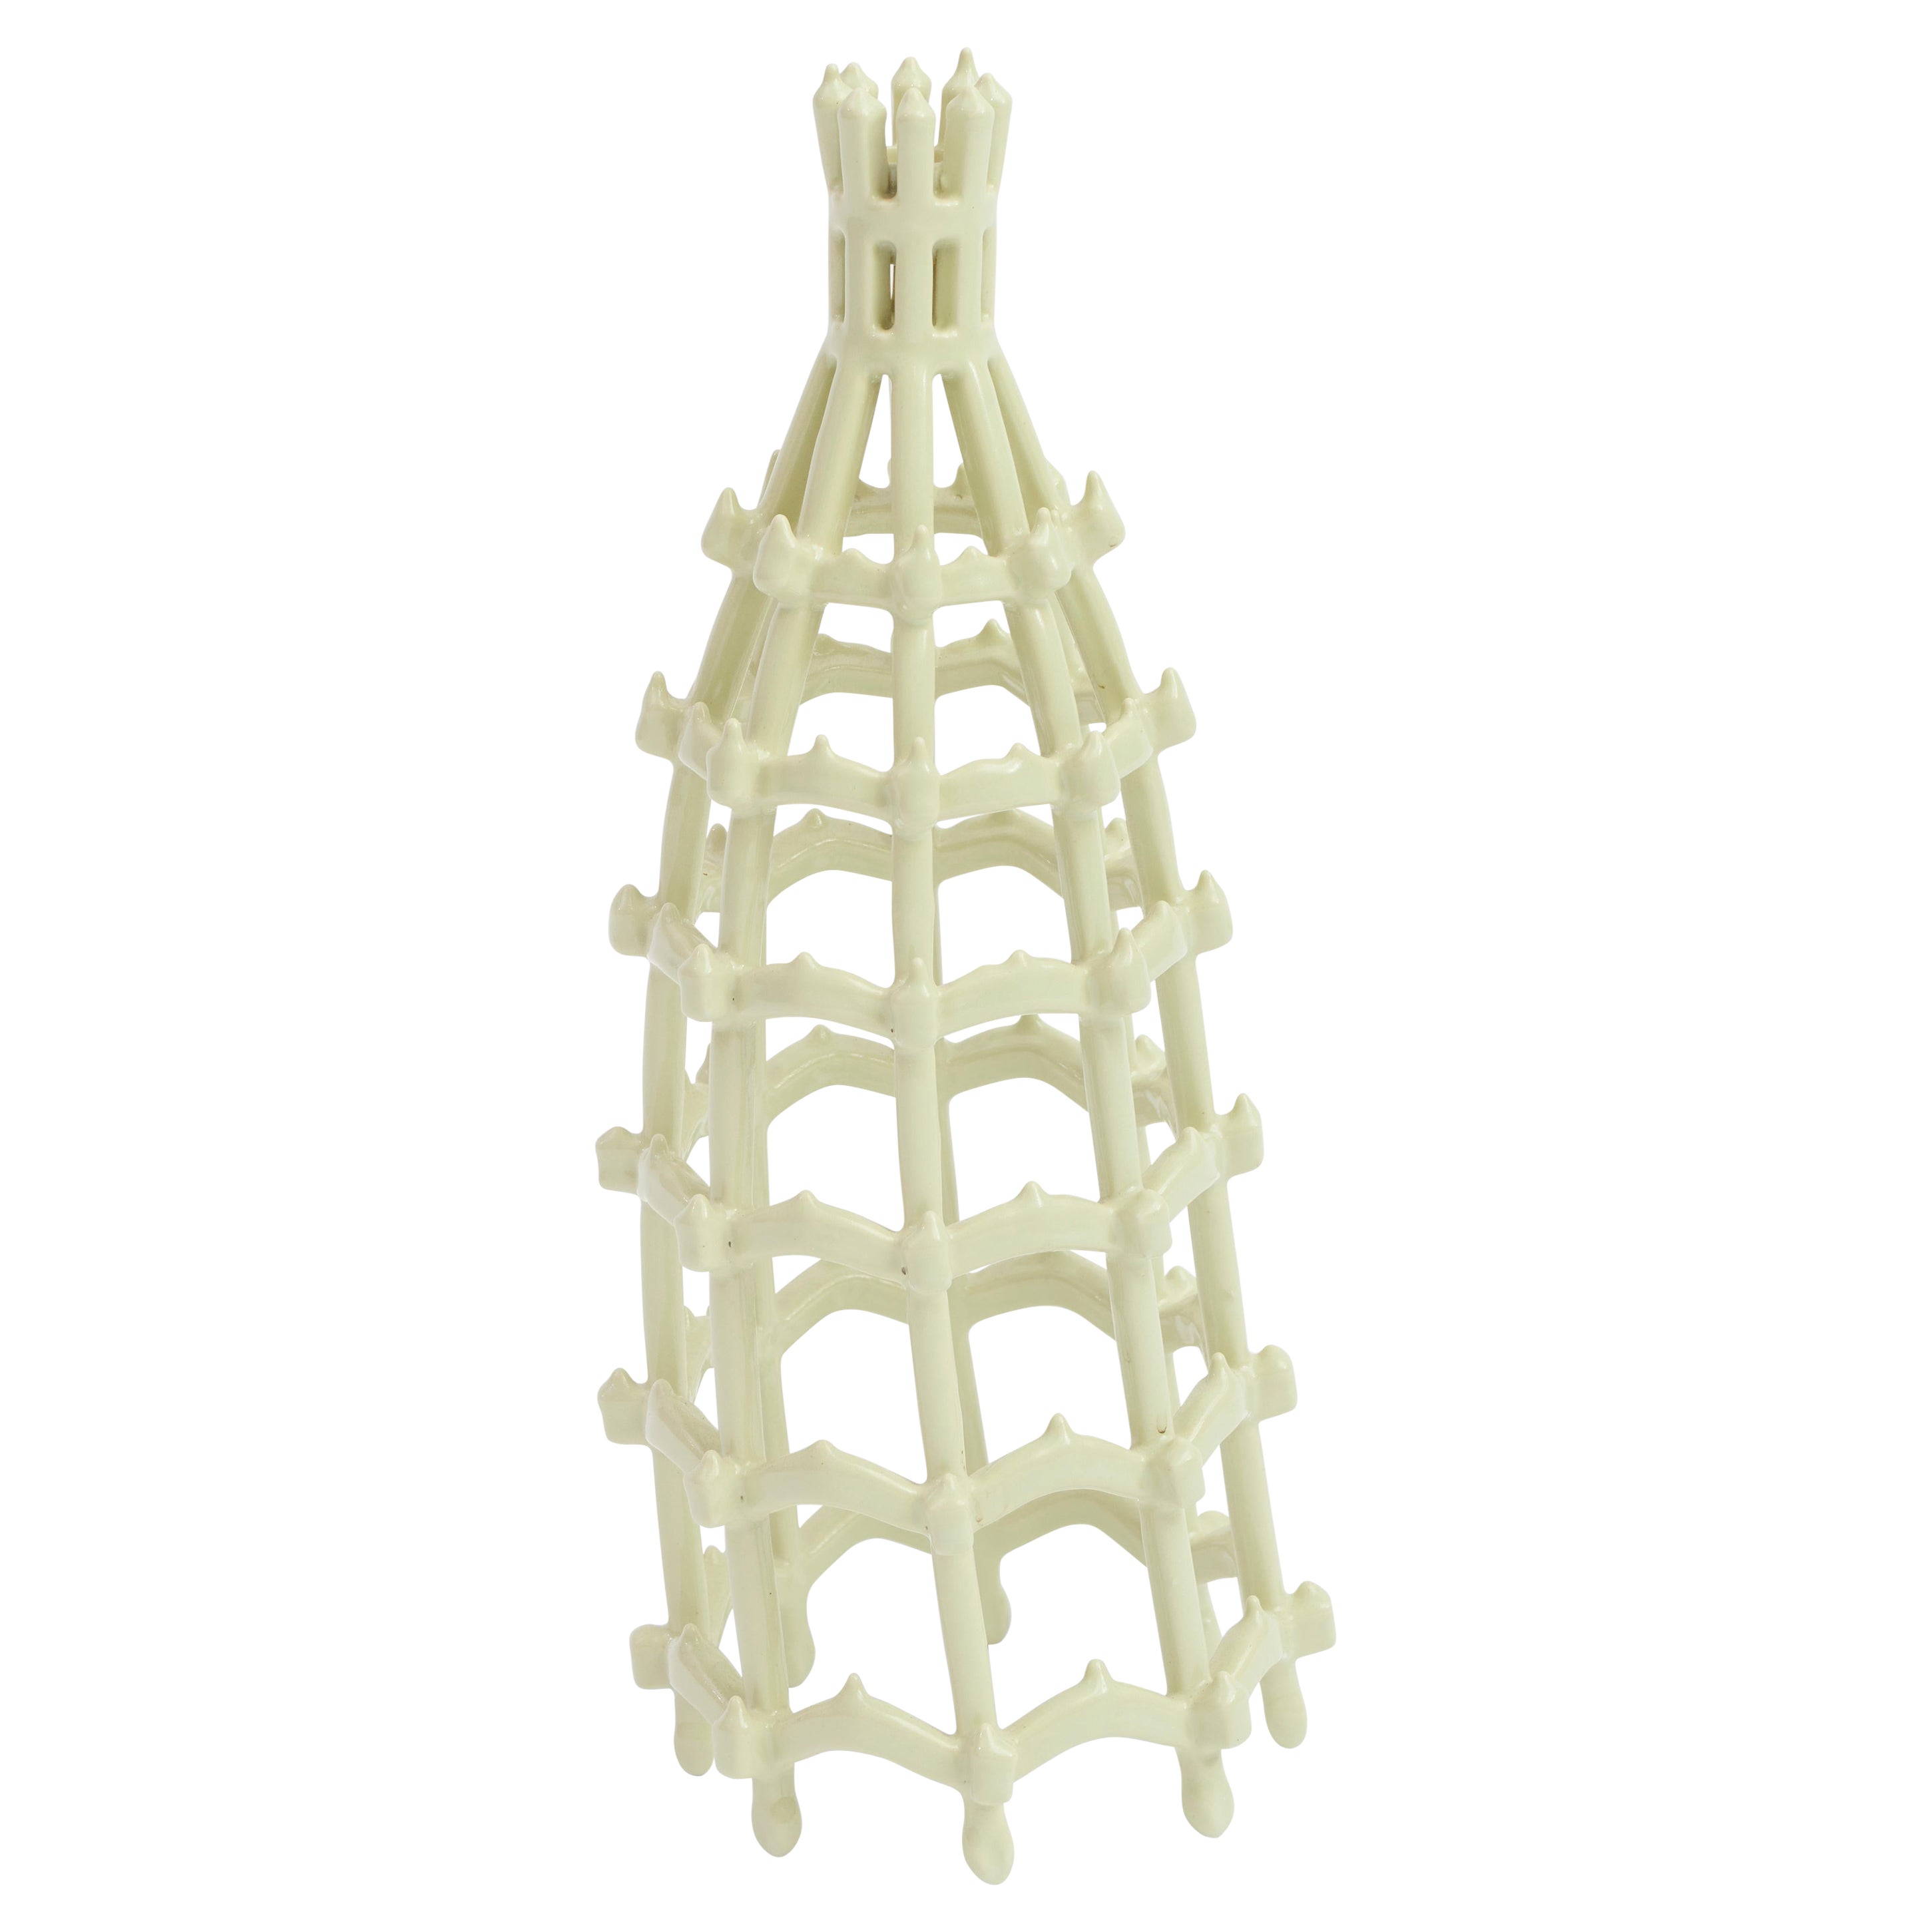 Handmade Porcelain Candle Holder in Pale Green, size Medium, by Atelier Fig. 